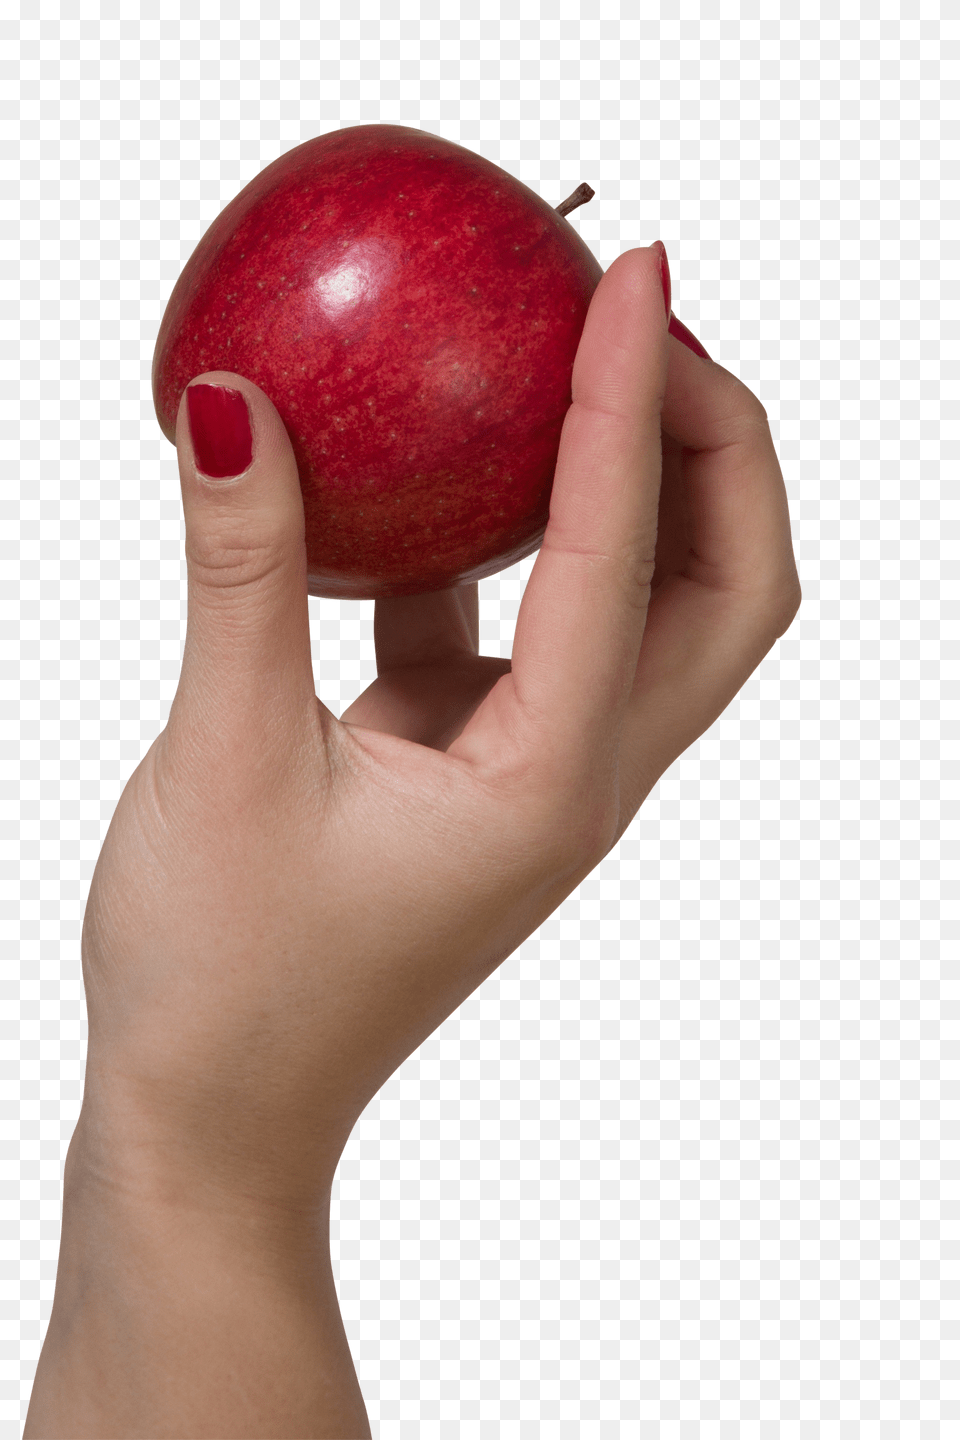 A Hand Holding Red Apple Apple In Hand, Plant, Fruit, Food, Produce Png Image